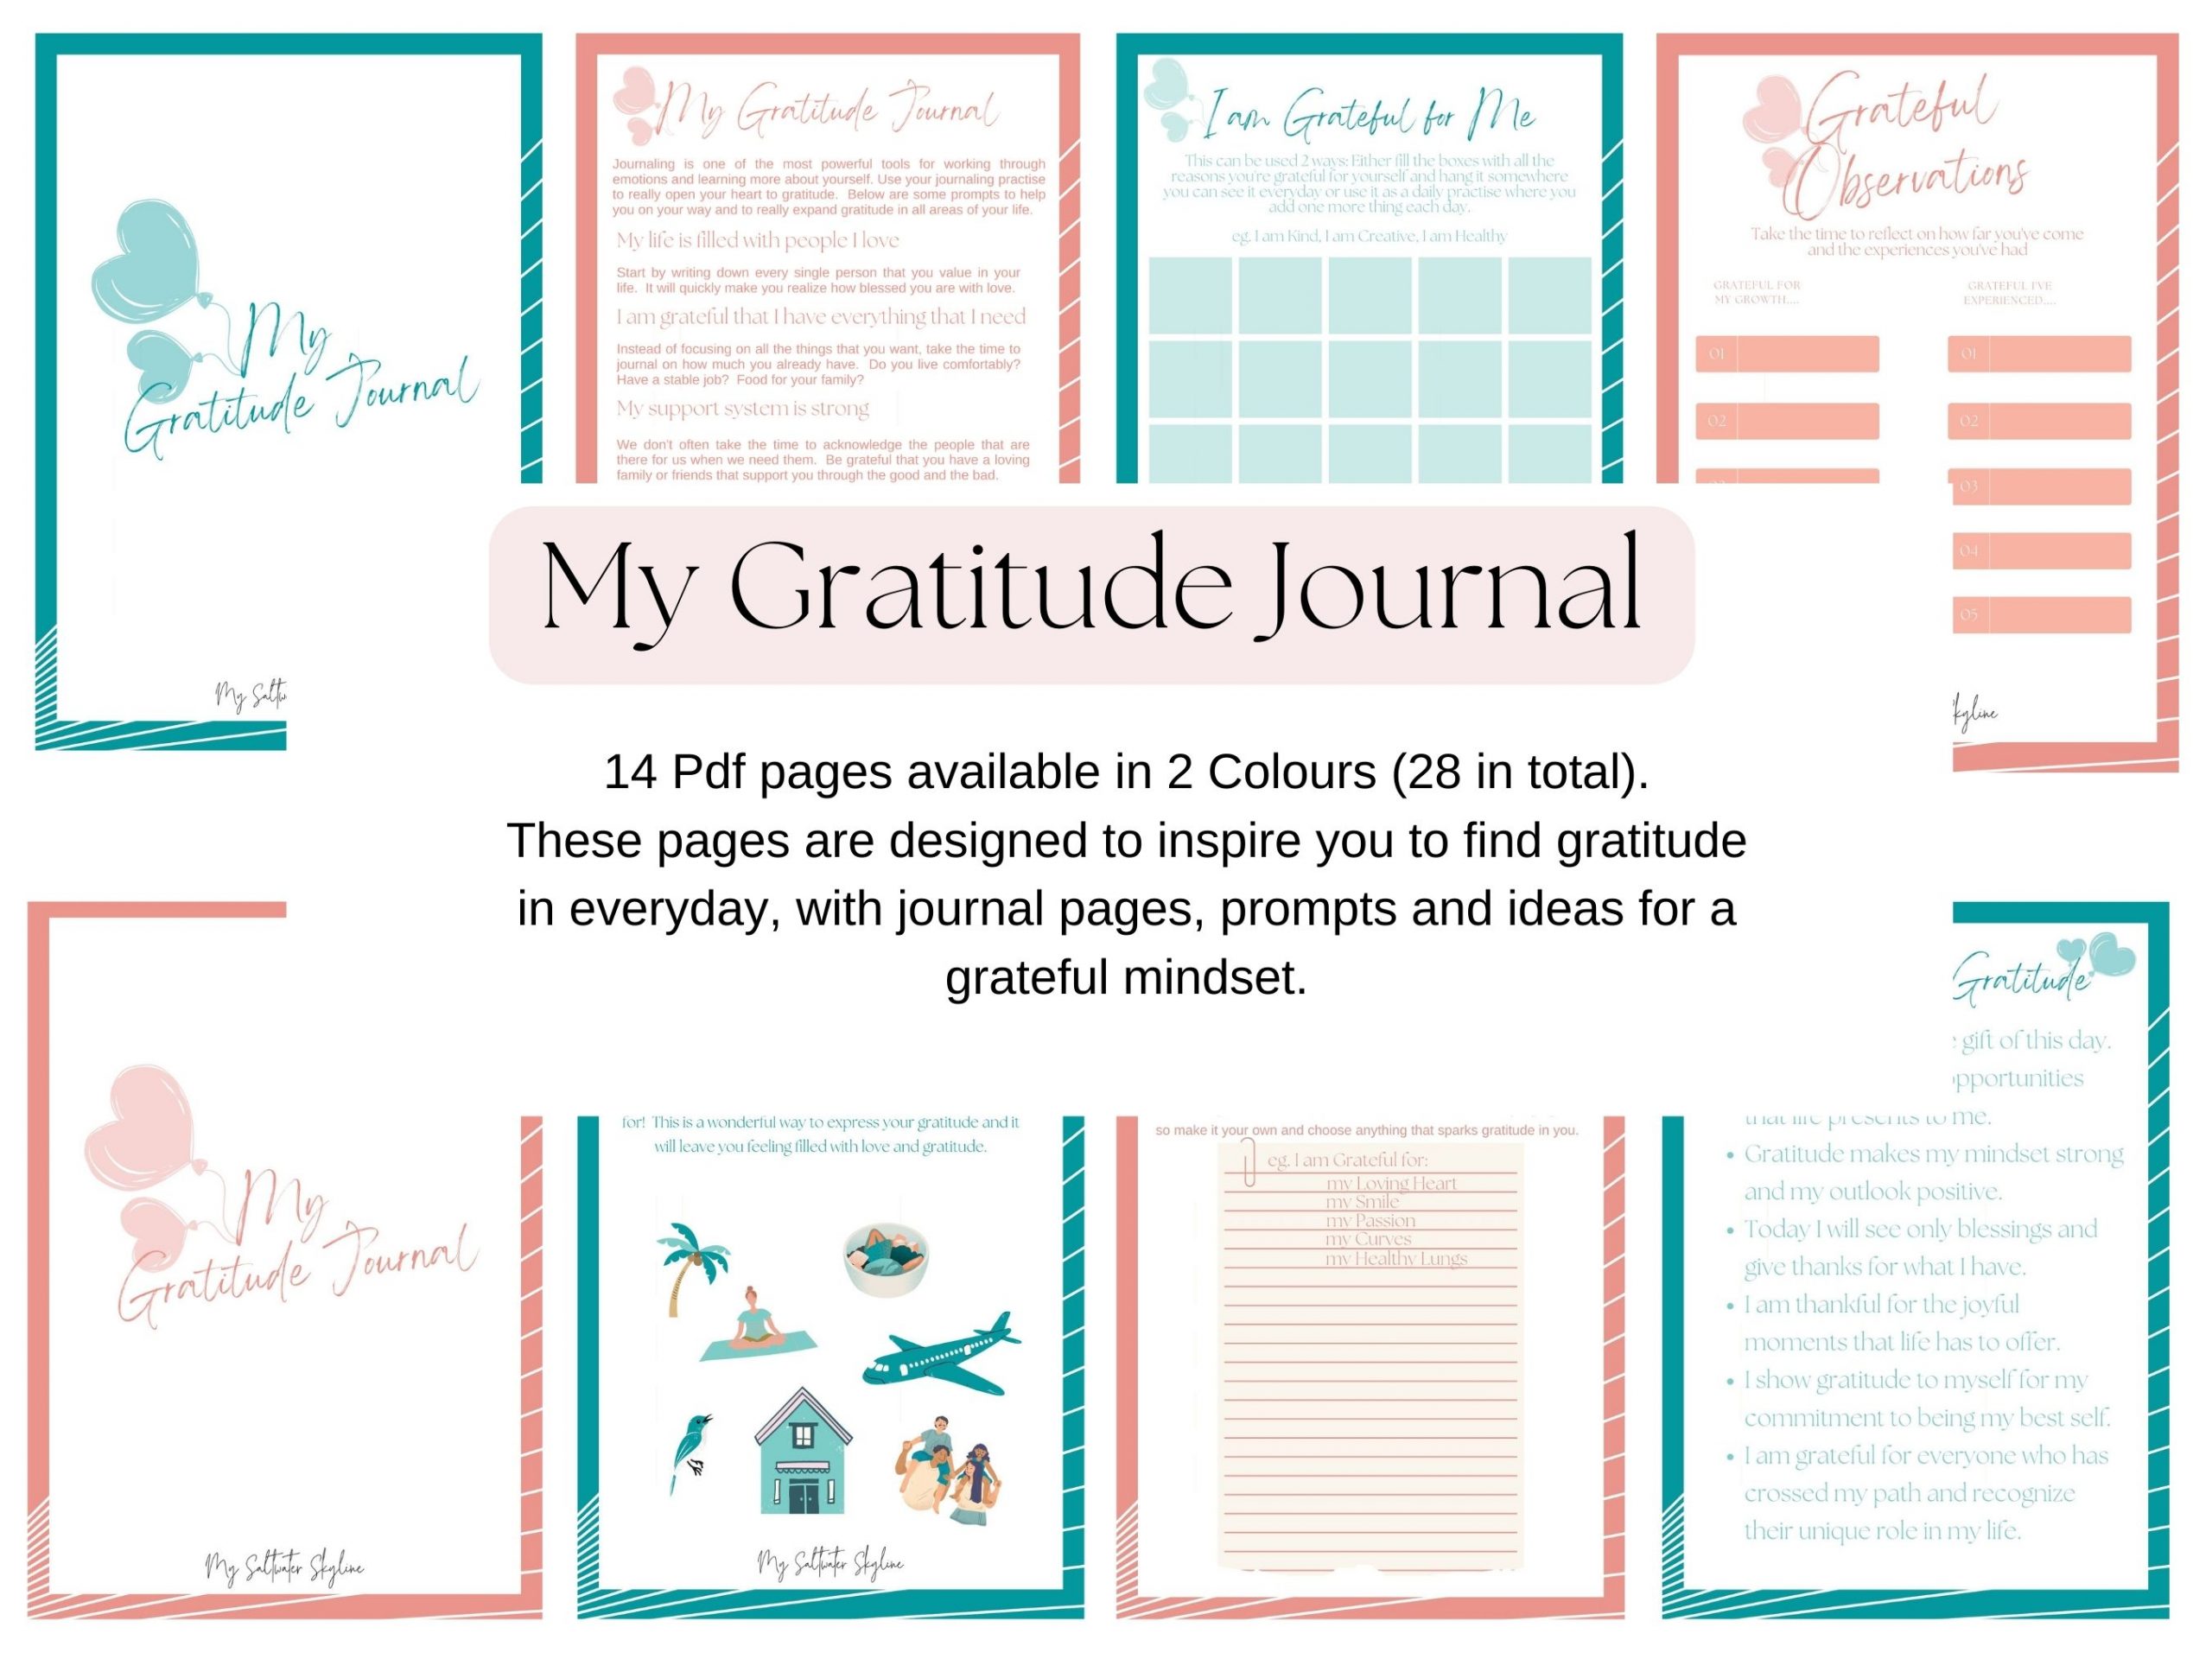 My Gratitude Journal Printable Guidebook - 14 Pages